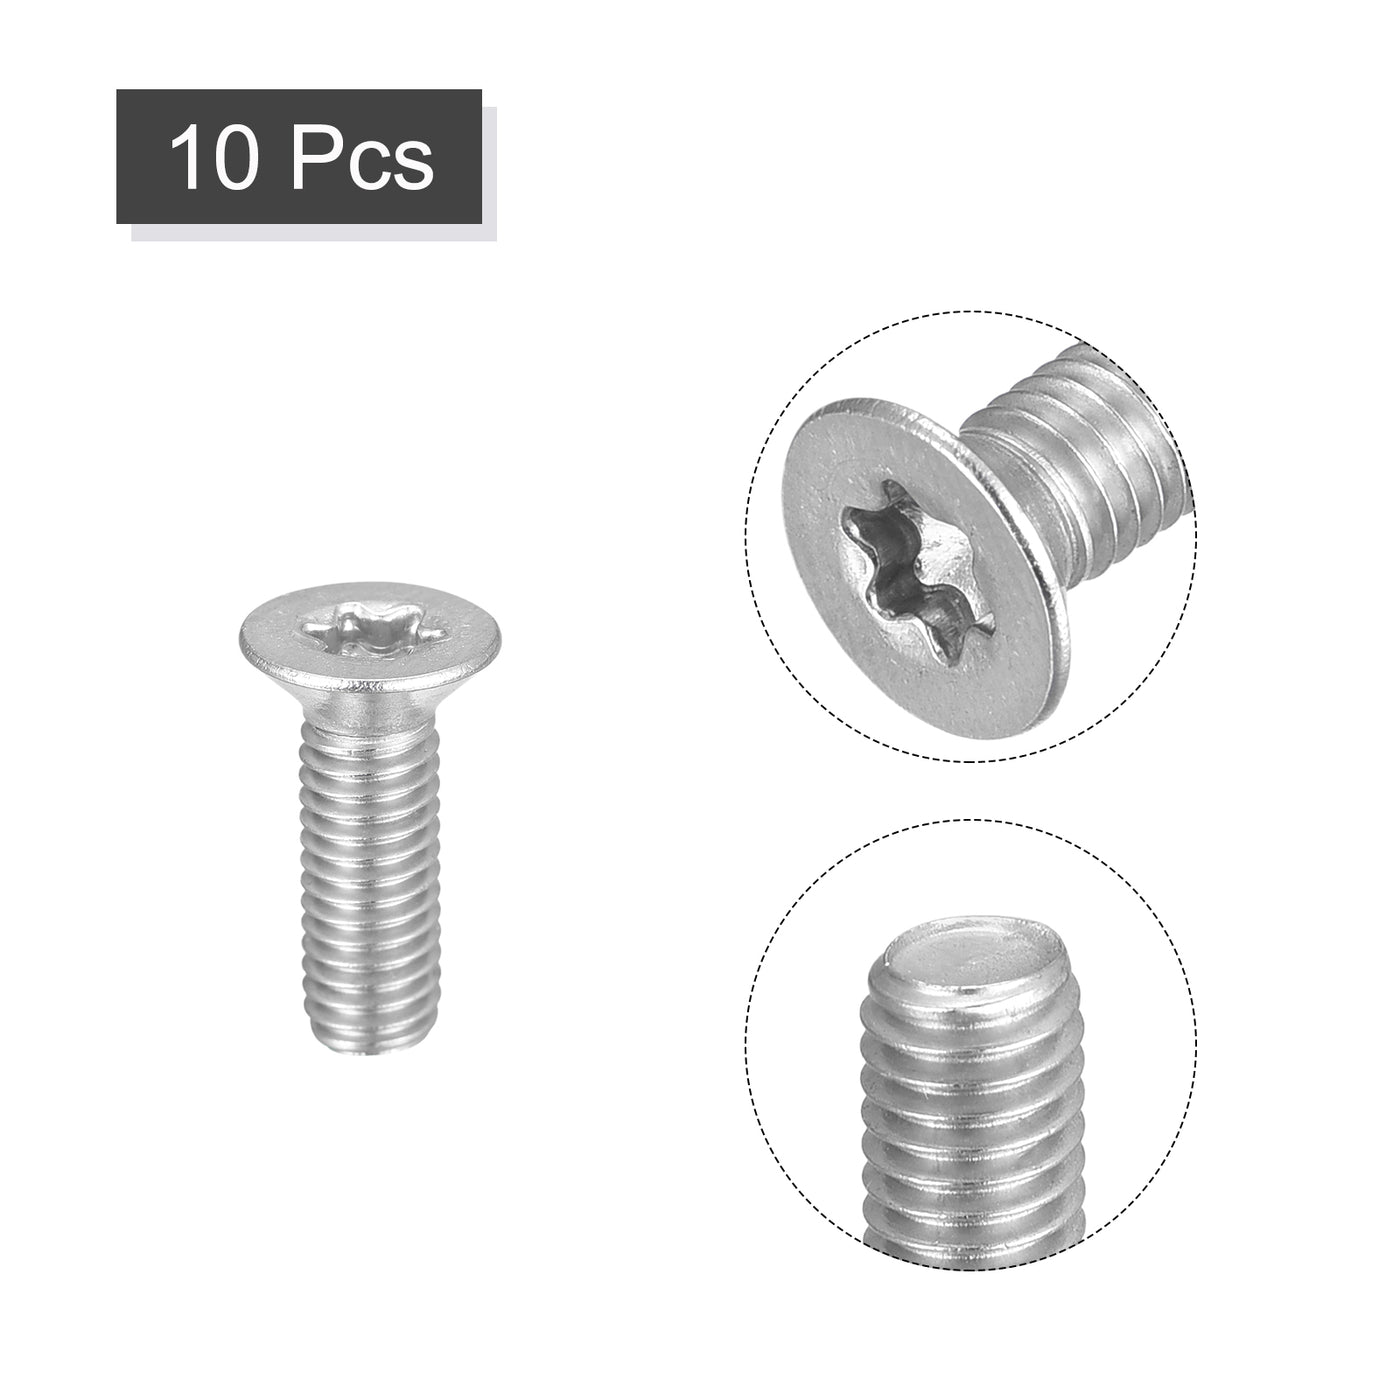 uxcell Uxcell M5x16mm Torx Security Screws, 10pcs 316 Stainless Steel Countersunk Head Screw